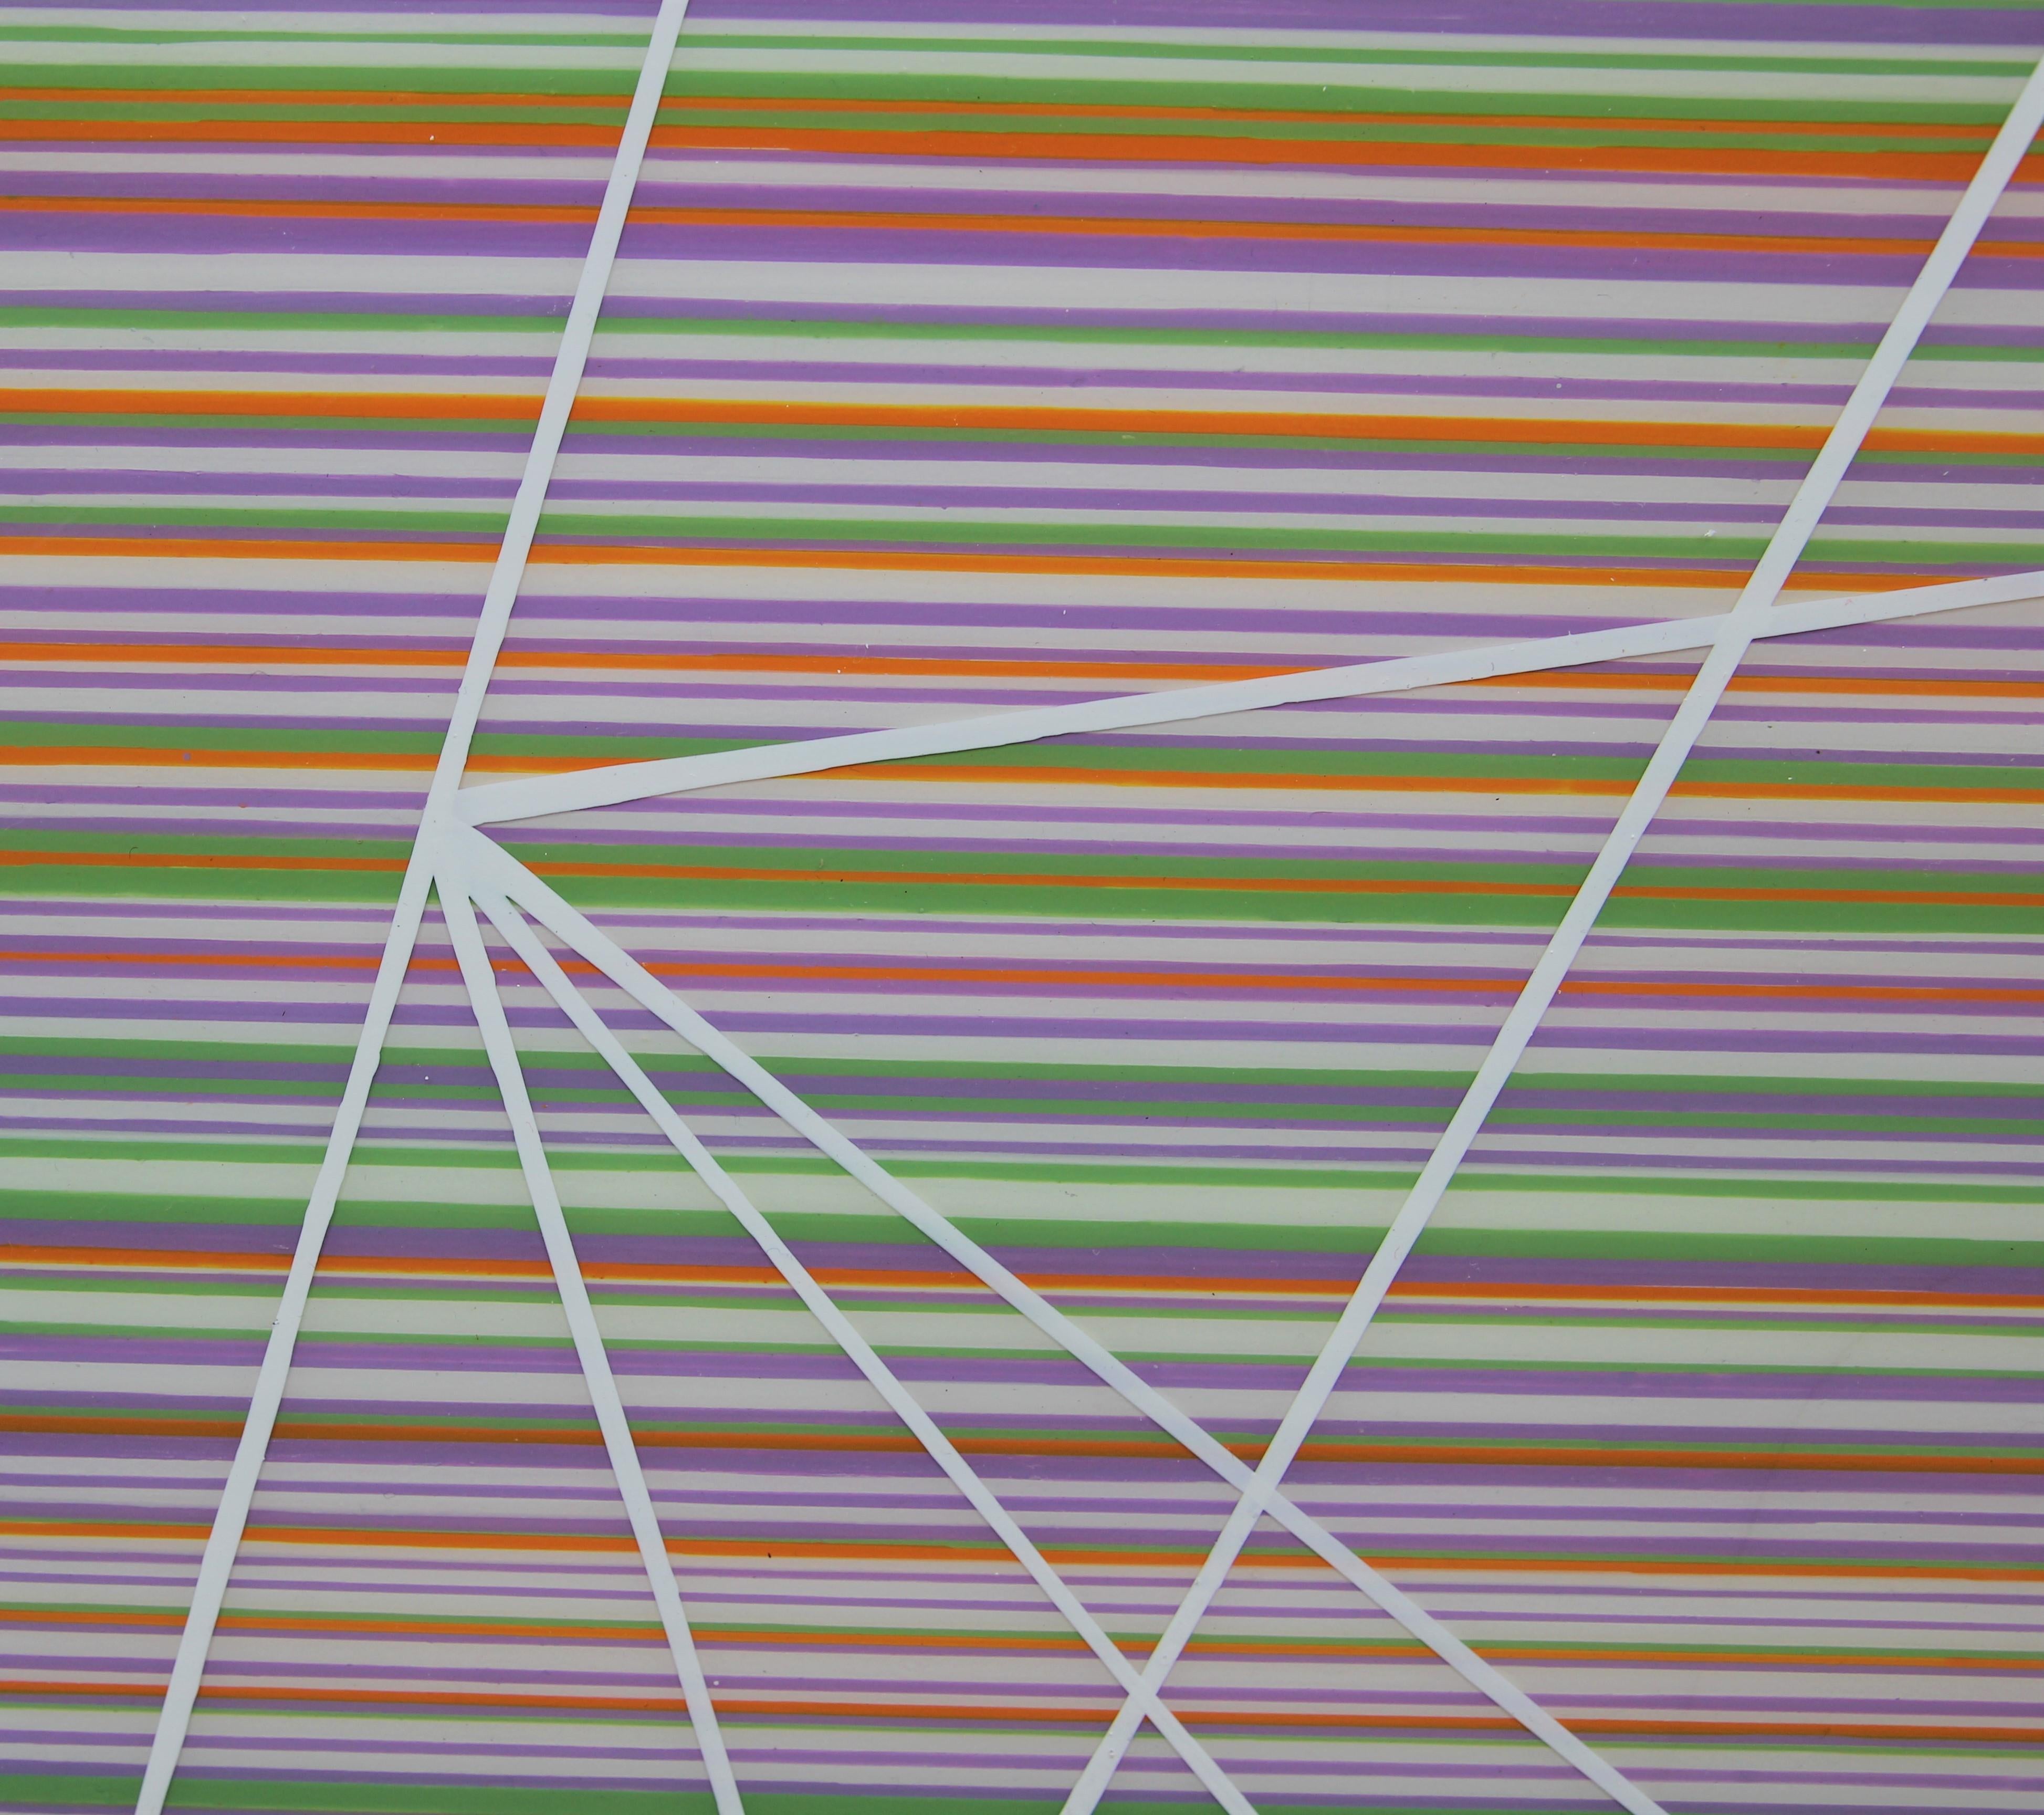 Minimal linear abstract painting with different colored parallel lines across the canvas. The work is signed, titled and dated on the back of the canvas by the artist. The canvas is not framed.

Artist Biography: Texas-born artist Anthony Reans has